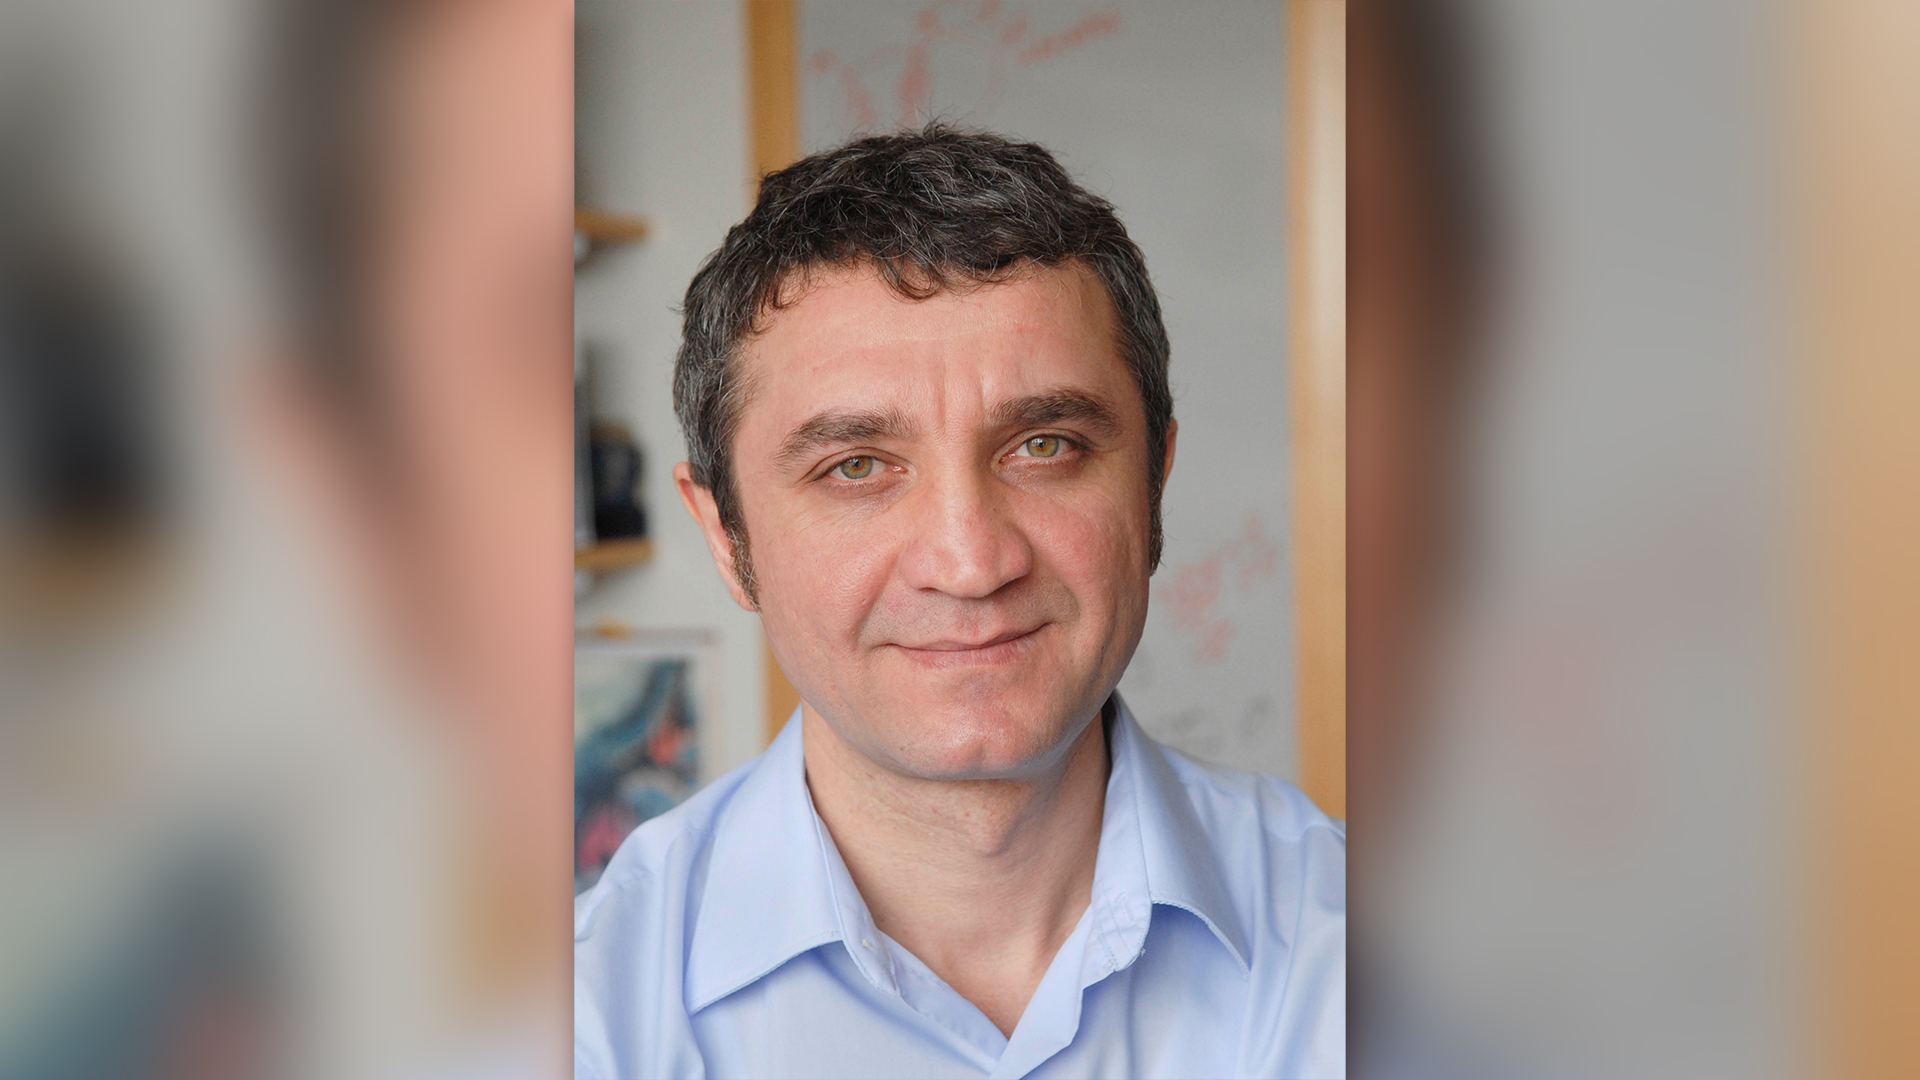  Inflammation is a 'mismatch between our evolutionary history and modern environment,' says immunologist Ruslan Medzhitov 